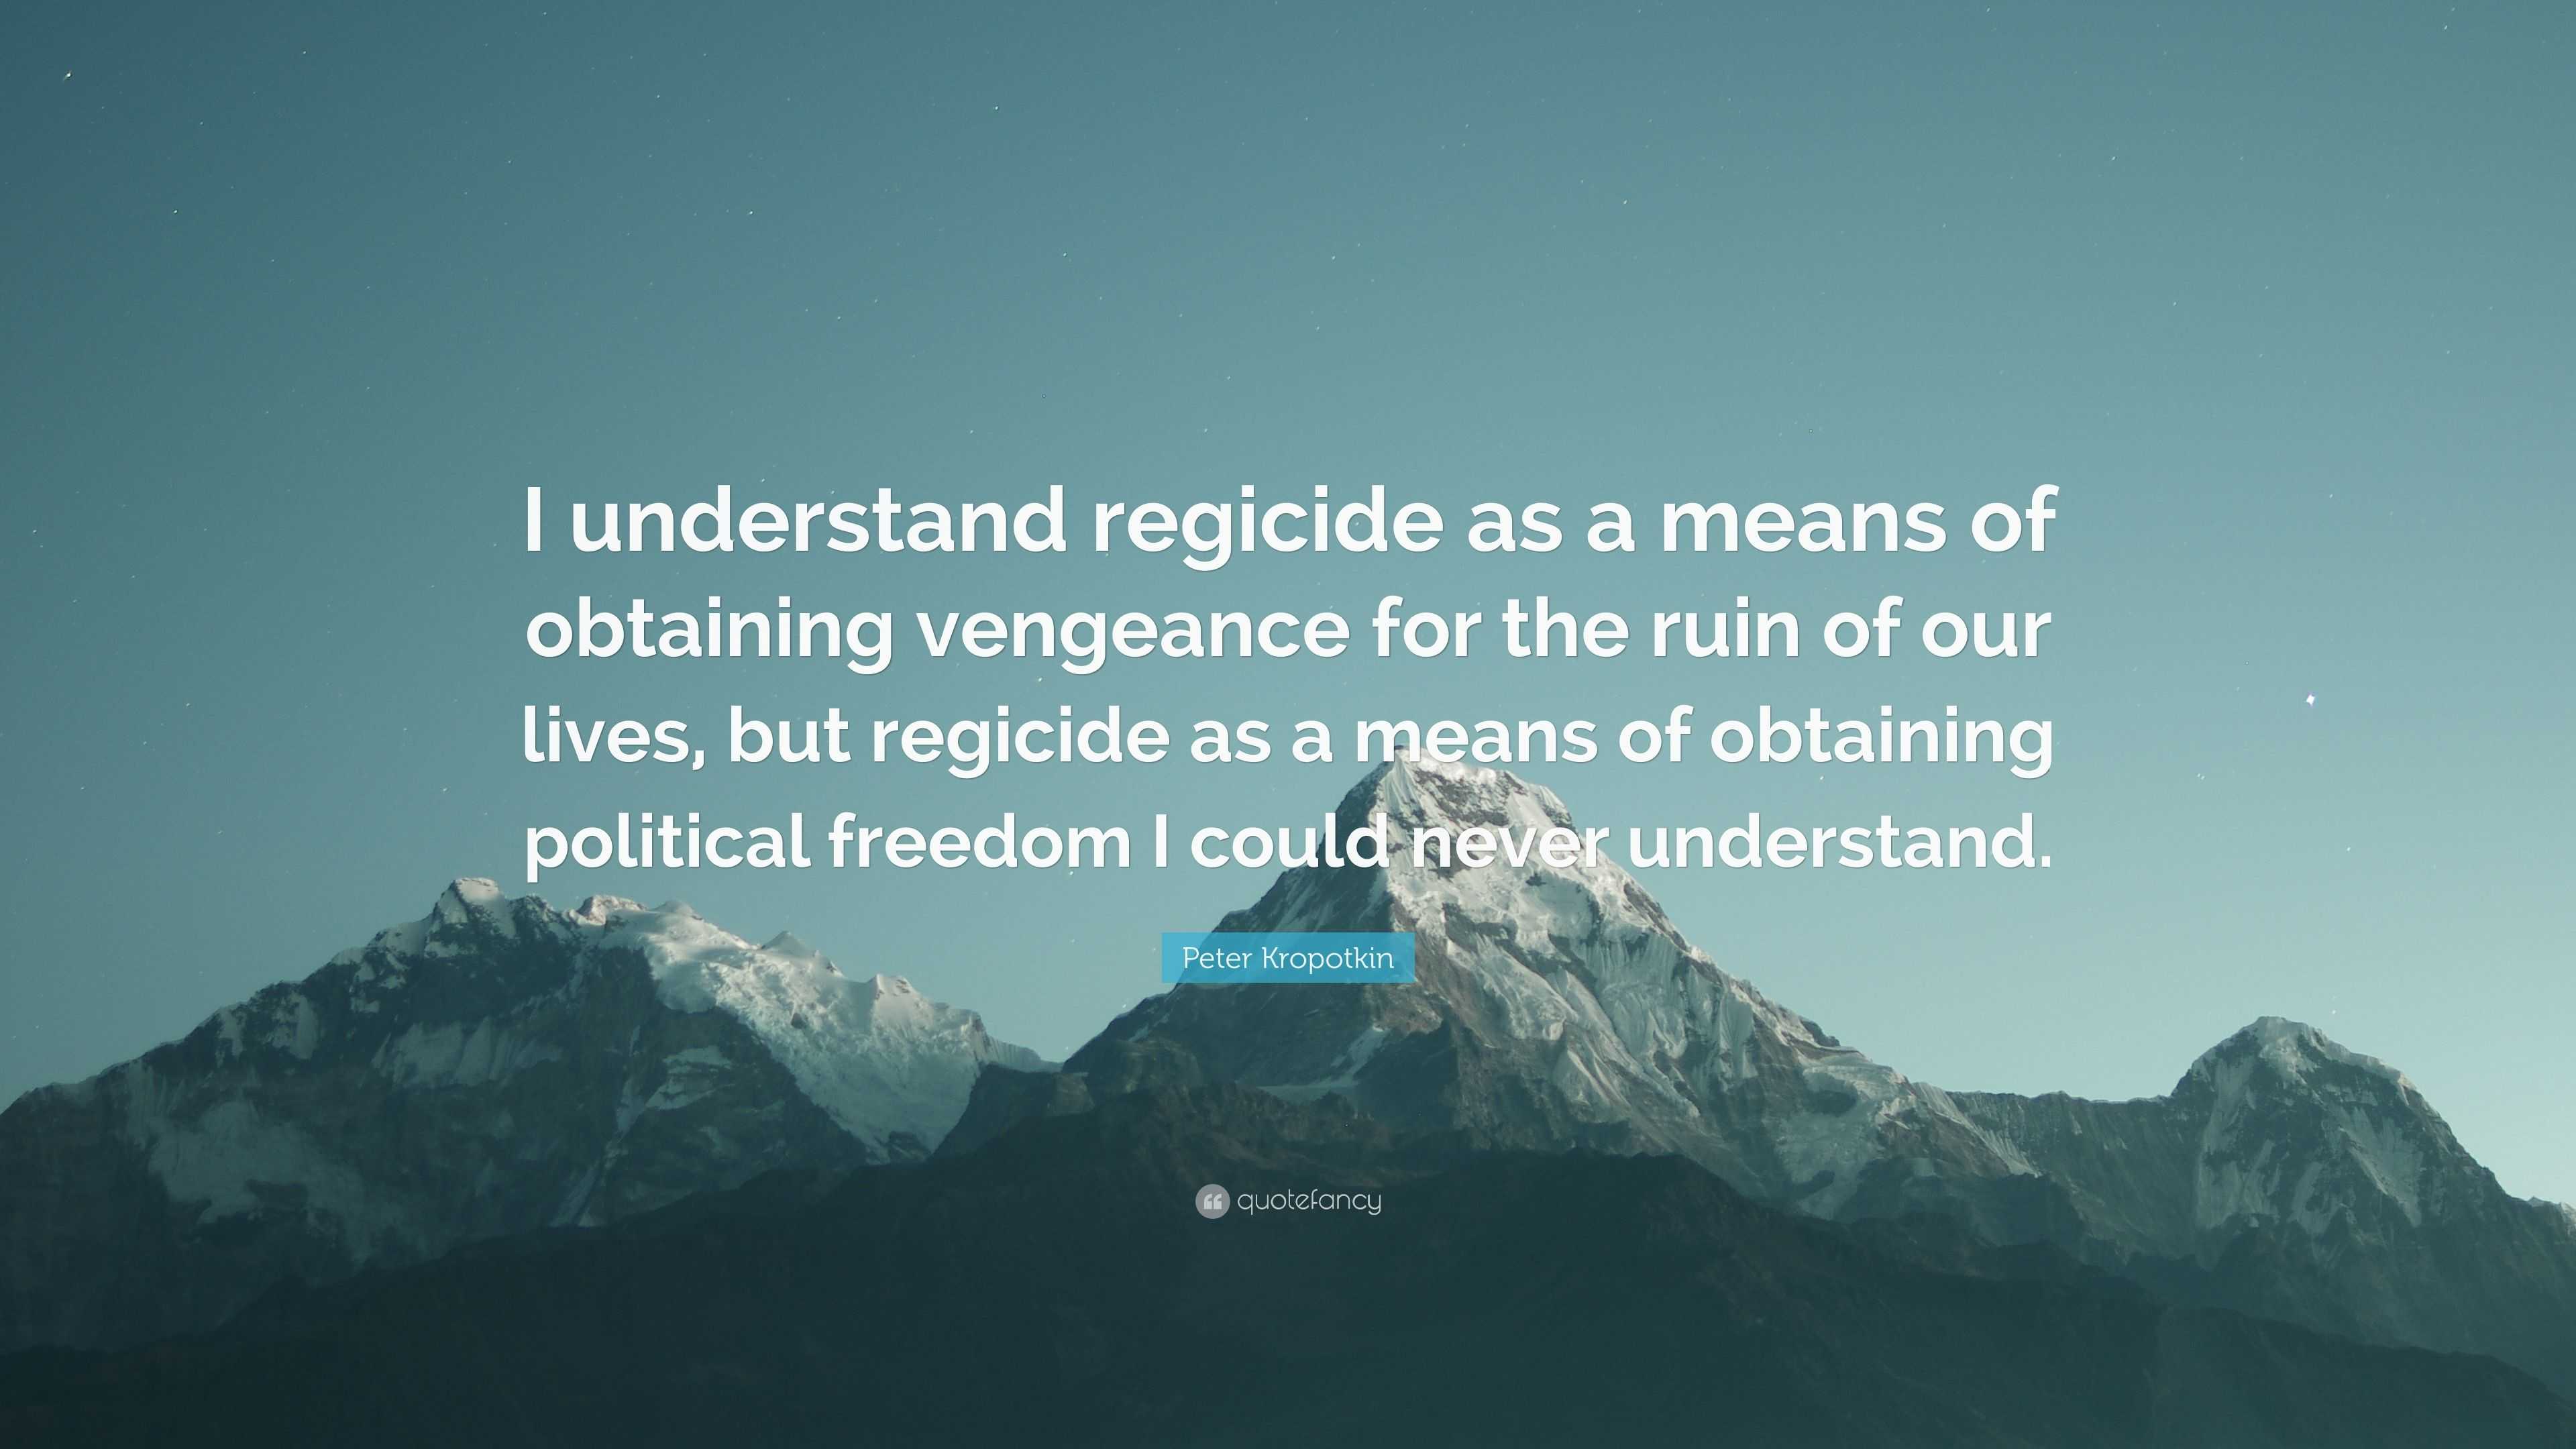 Peter Kropotkin Quote: “I understand regicide as a means of